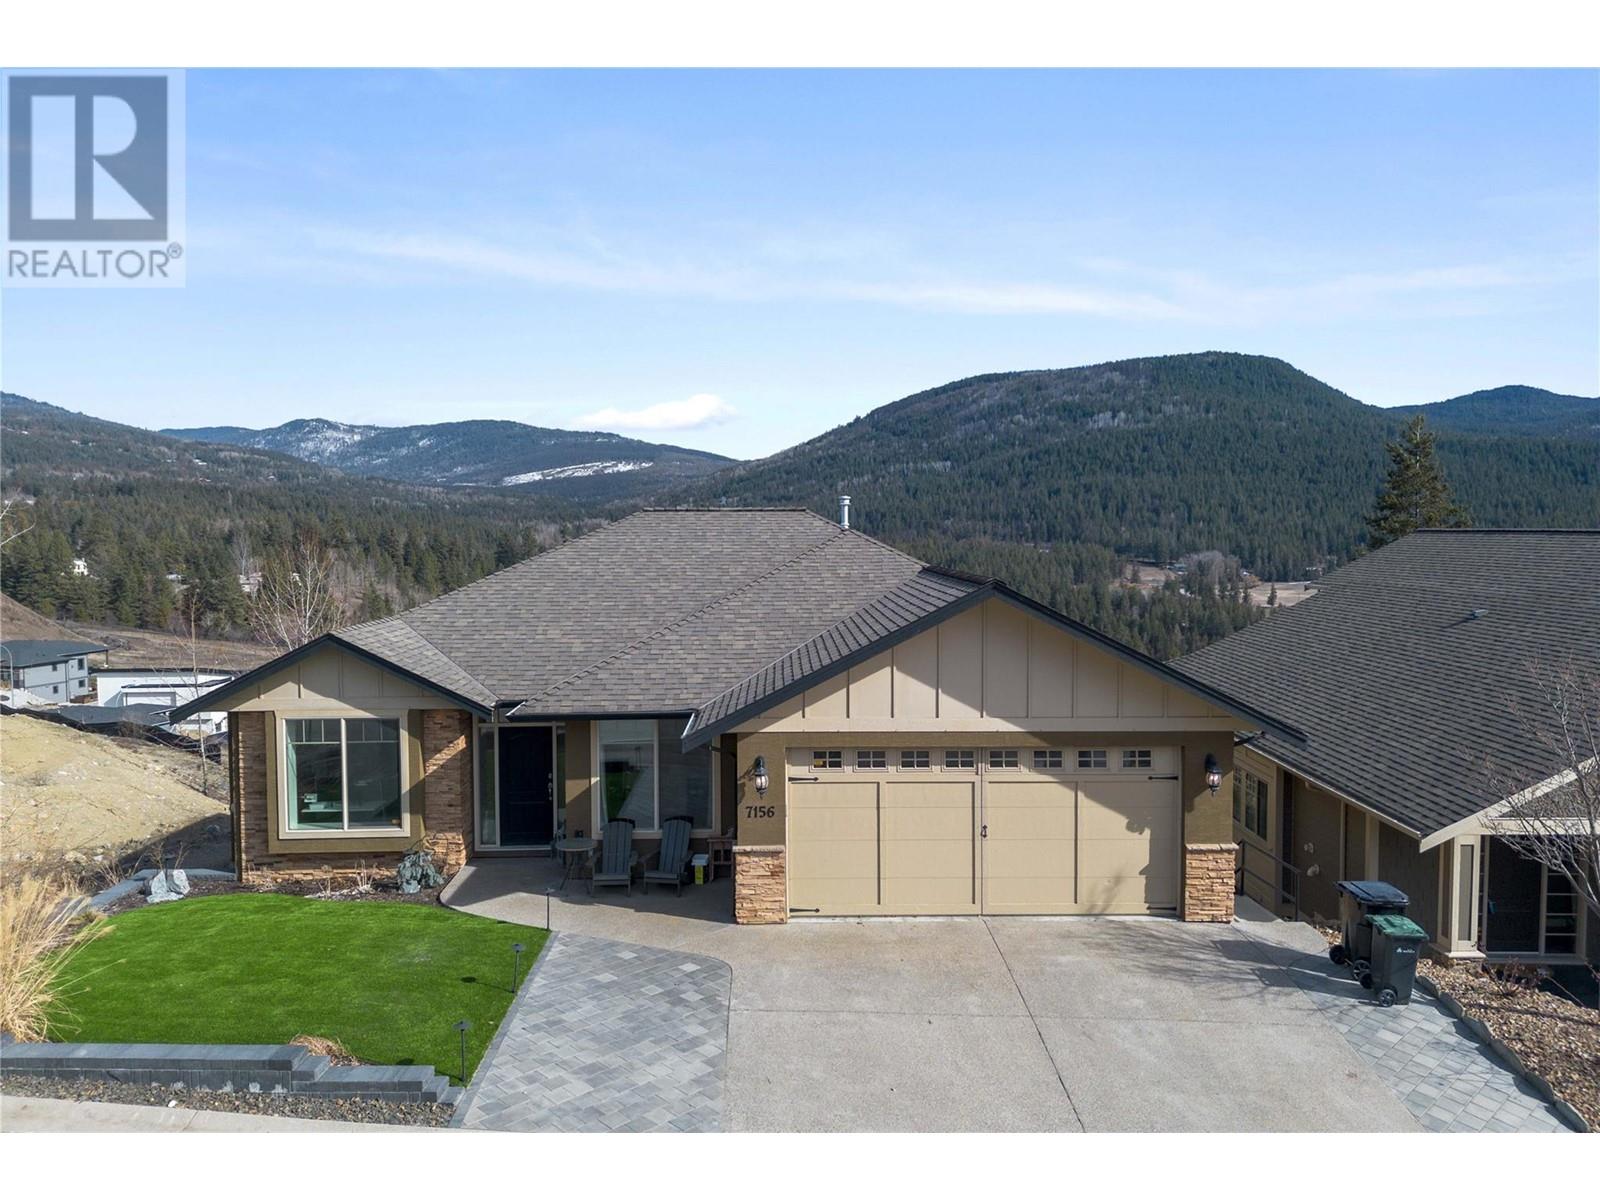 7156 Tabor Drive, Foothills, Vernon 